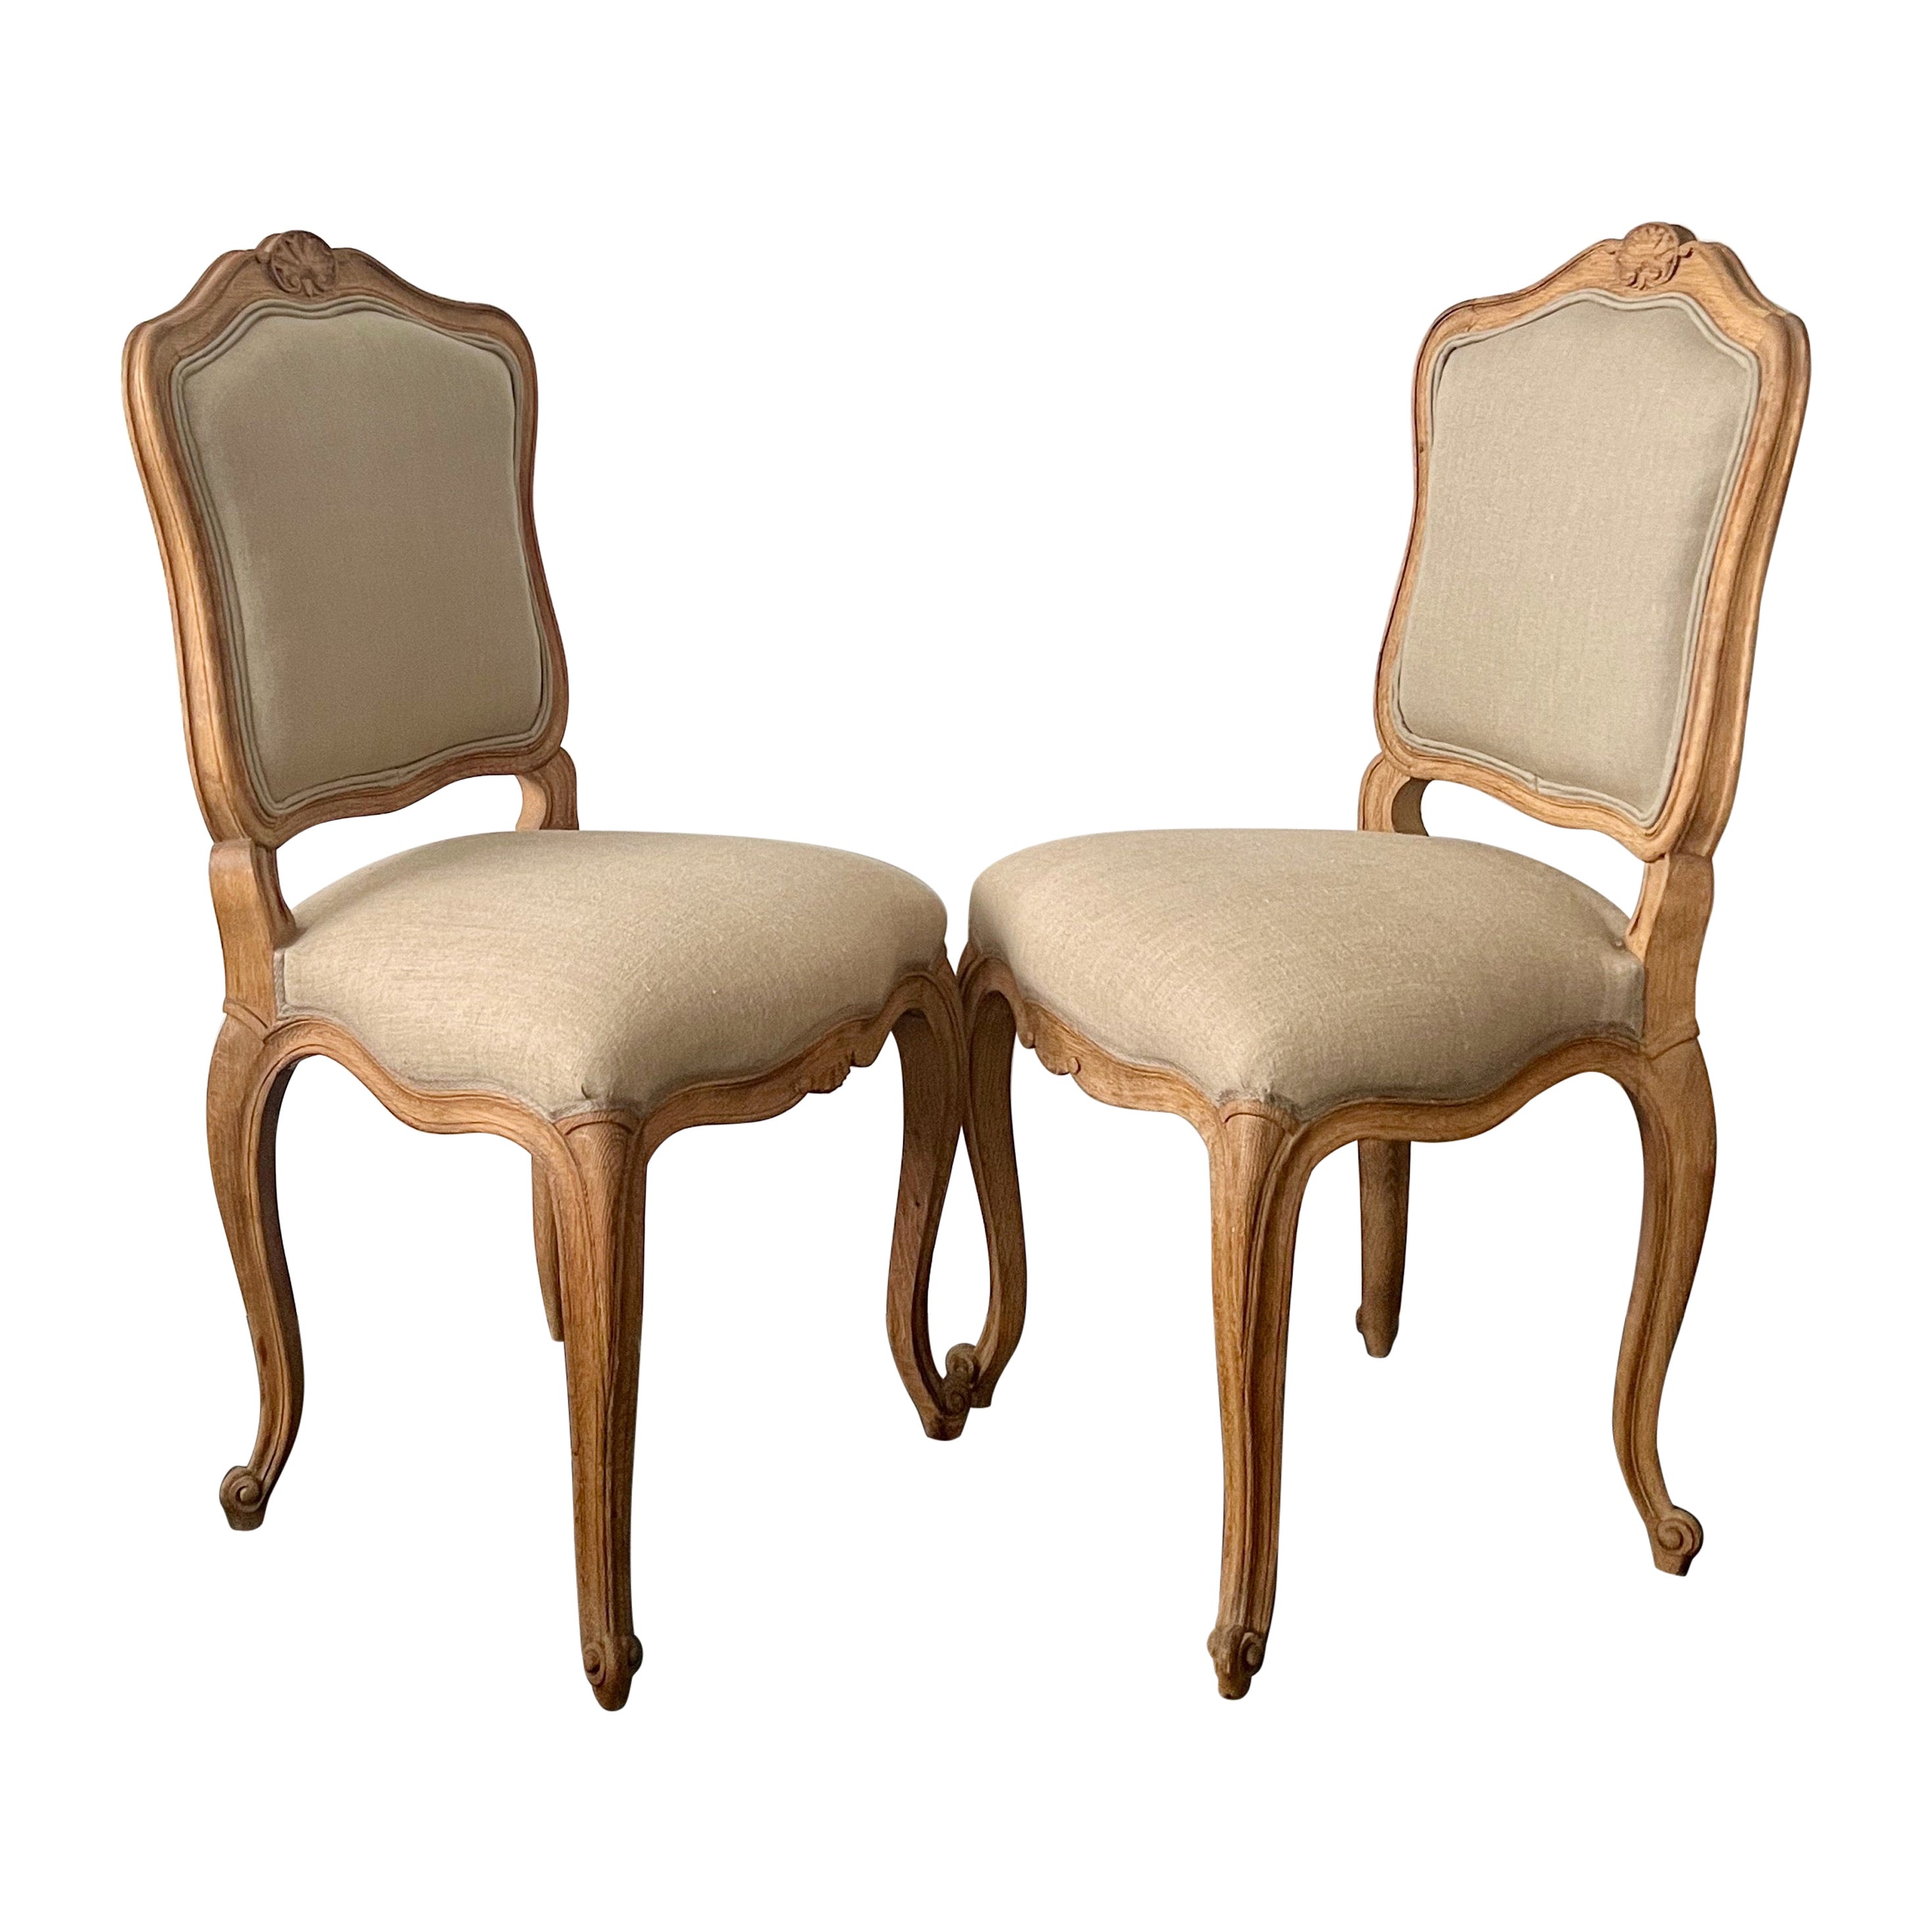 Pair of 19th century French LXV Style Chairs